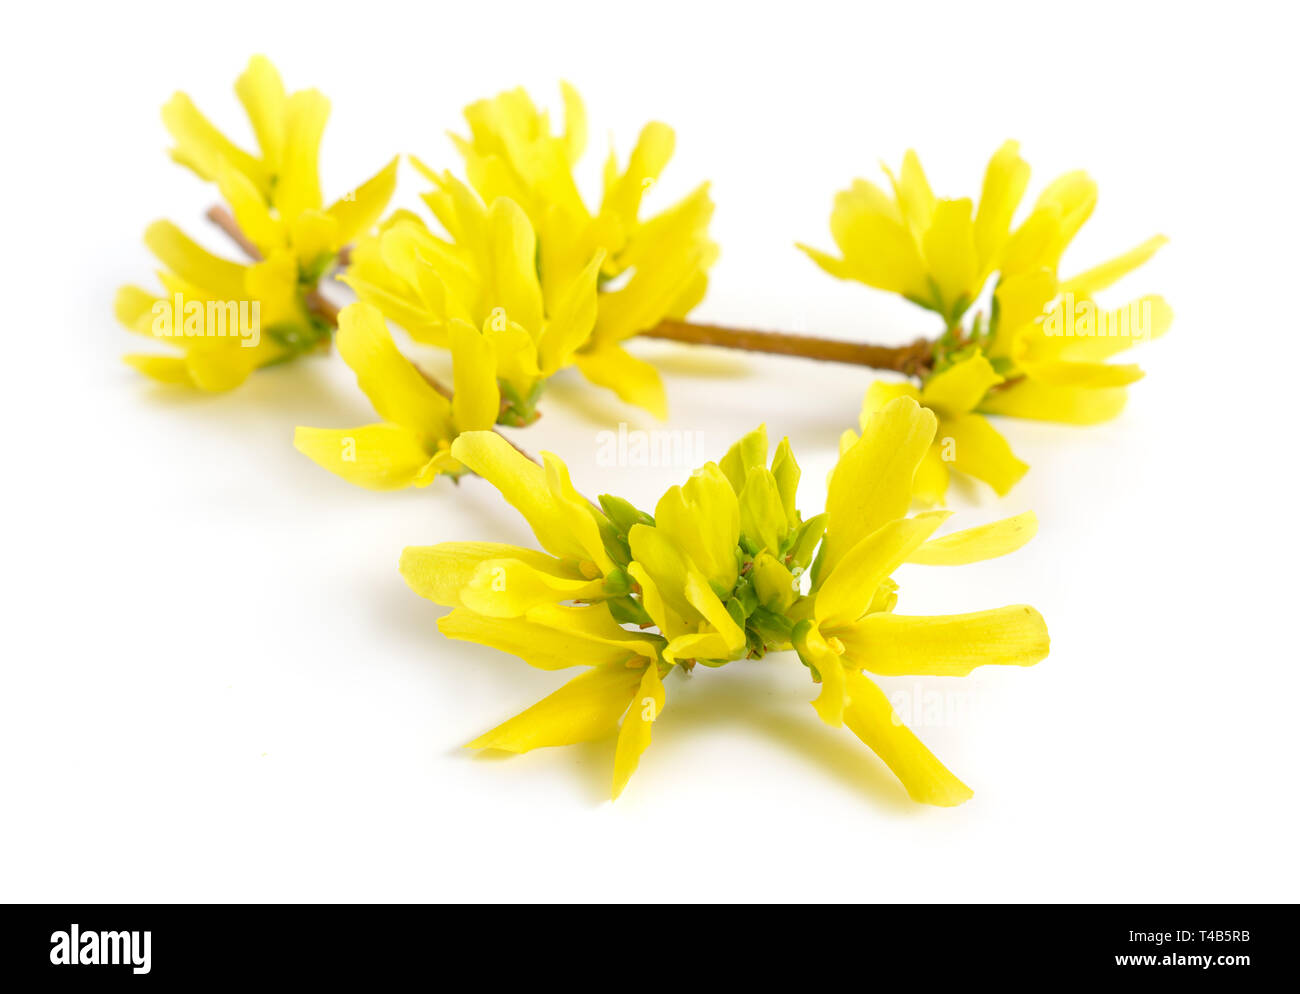 Forsythia is a genus of flowering plants in the olive family ...